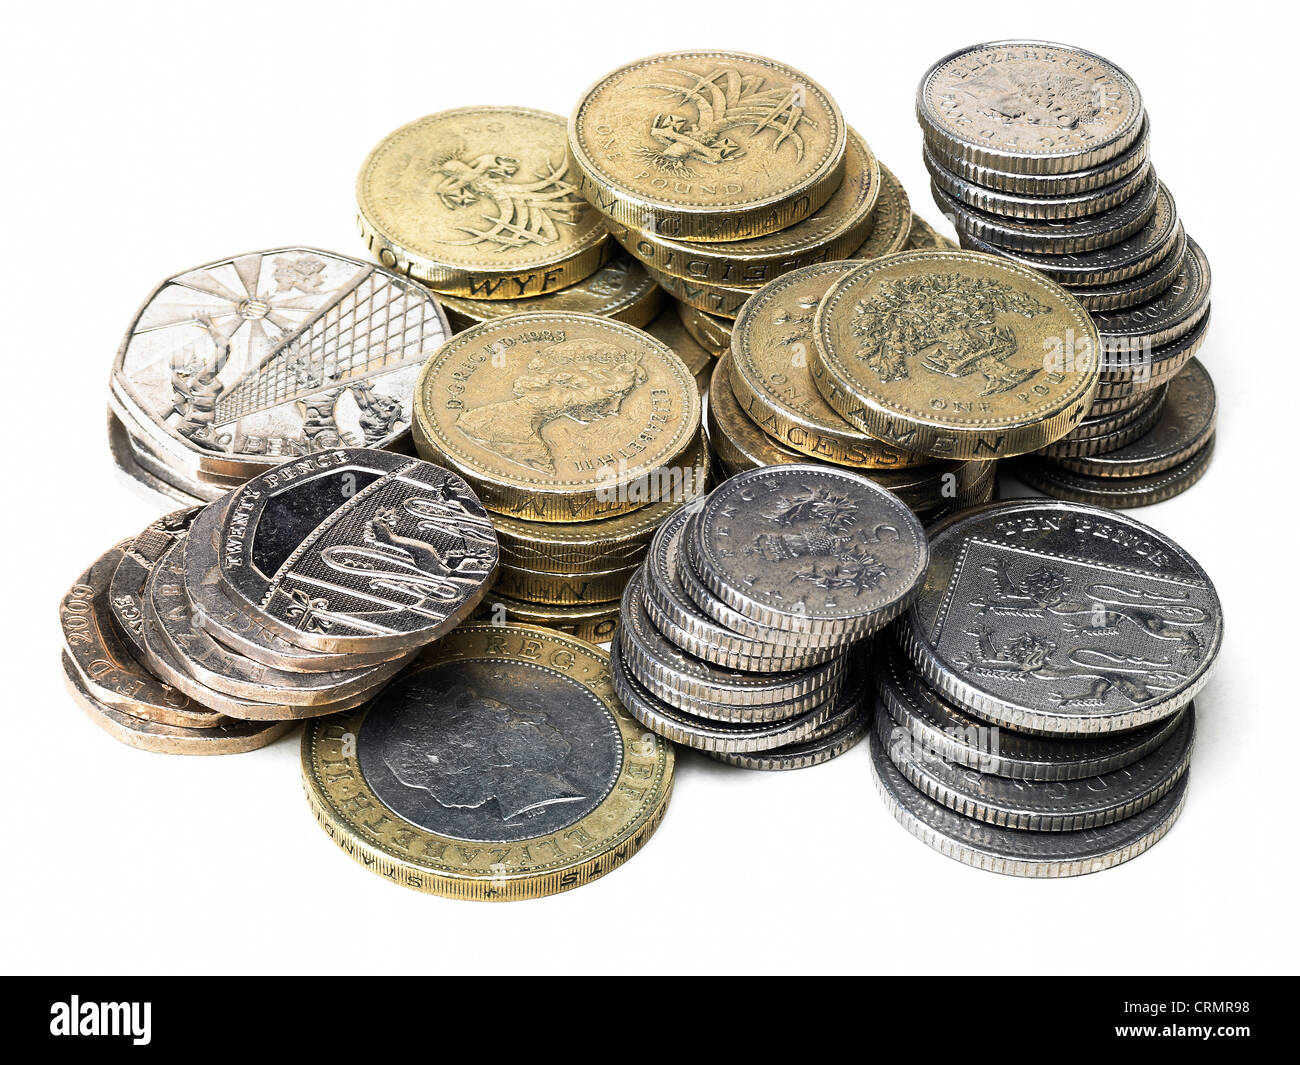 Piles of British coins, pounds and silver Stock Photo